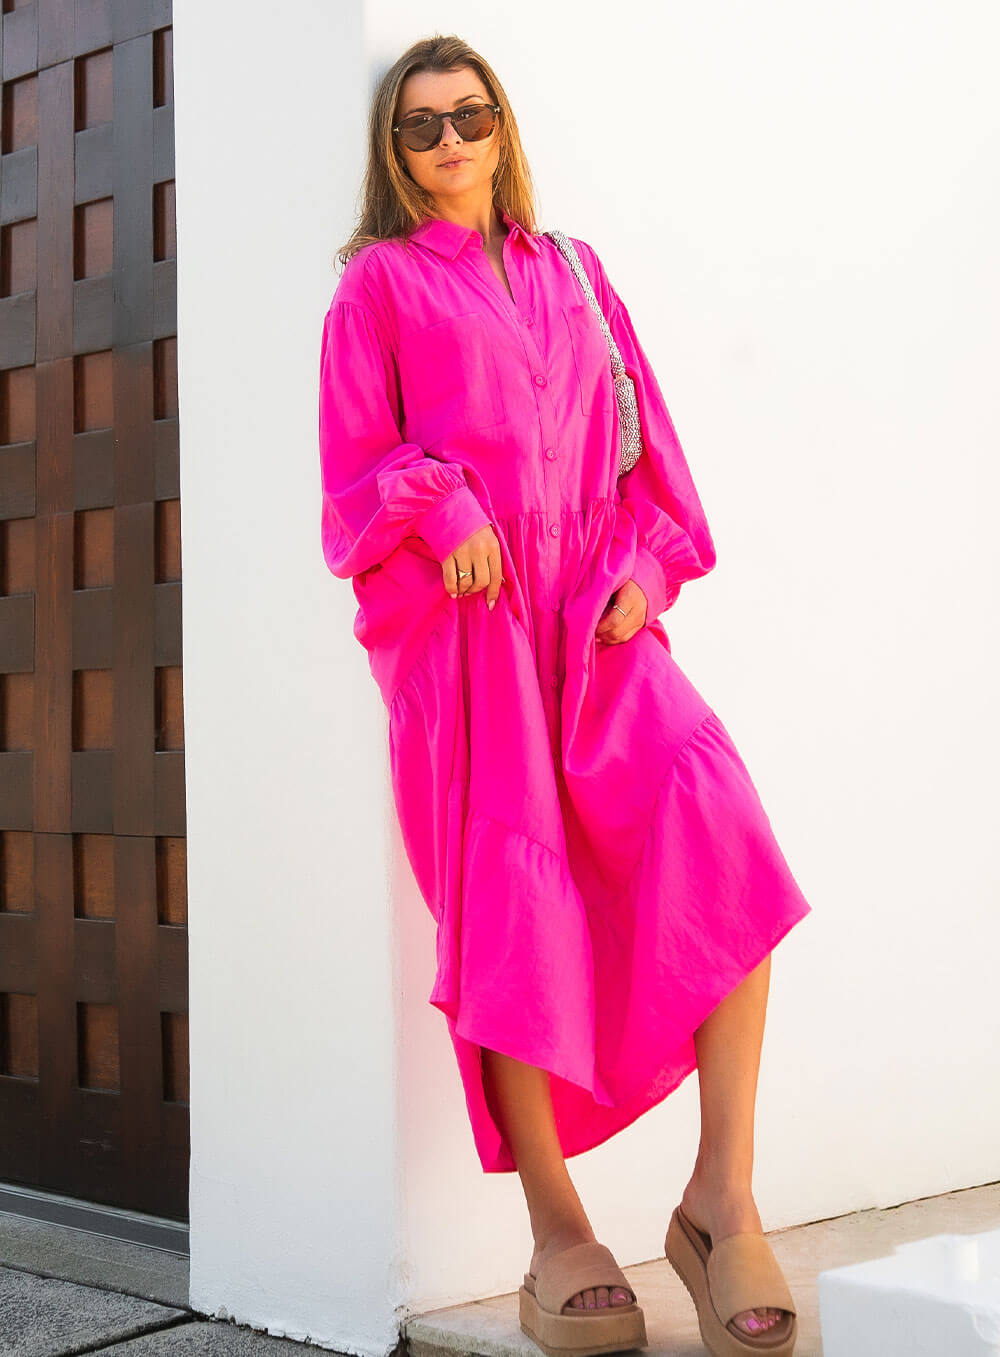 The Daisy Linen Midi Dress in pink is made from 100% linen, It's overised layers drape over the body flowing effortlessly.